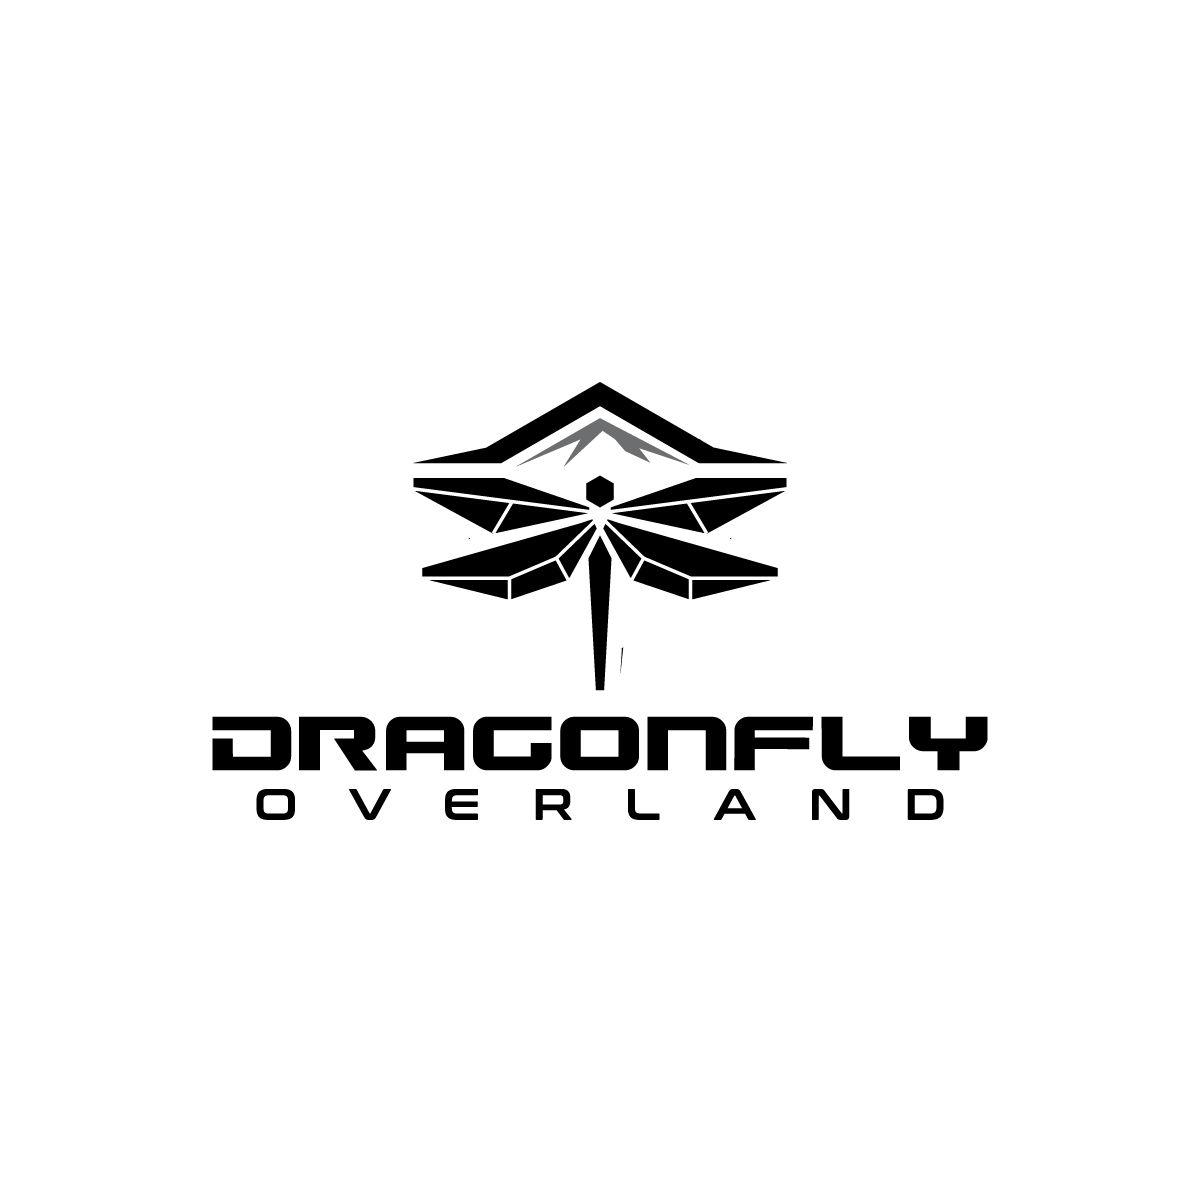 Overland Logo - Steampunk-Esque Dragonfly Logo needed for Dragonfly Overland | 48 ...